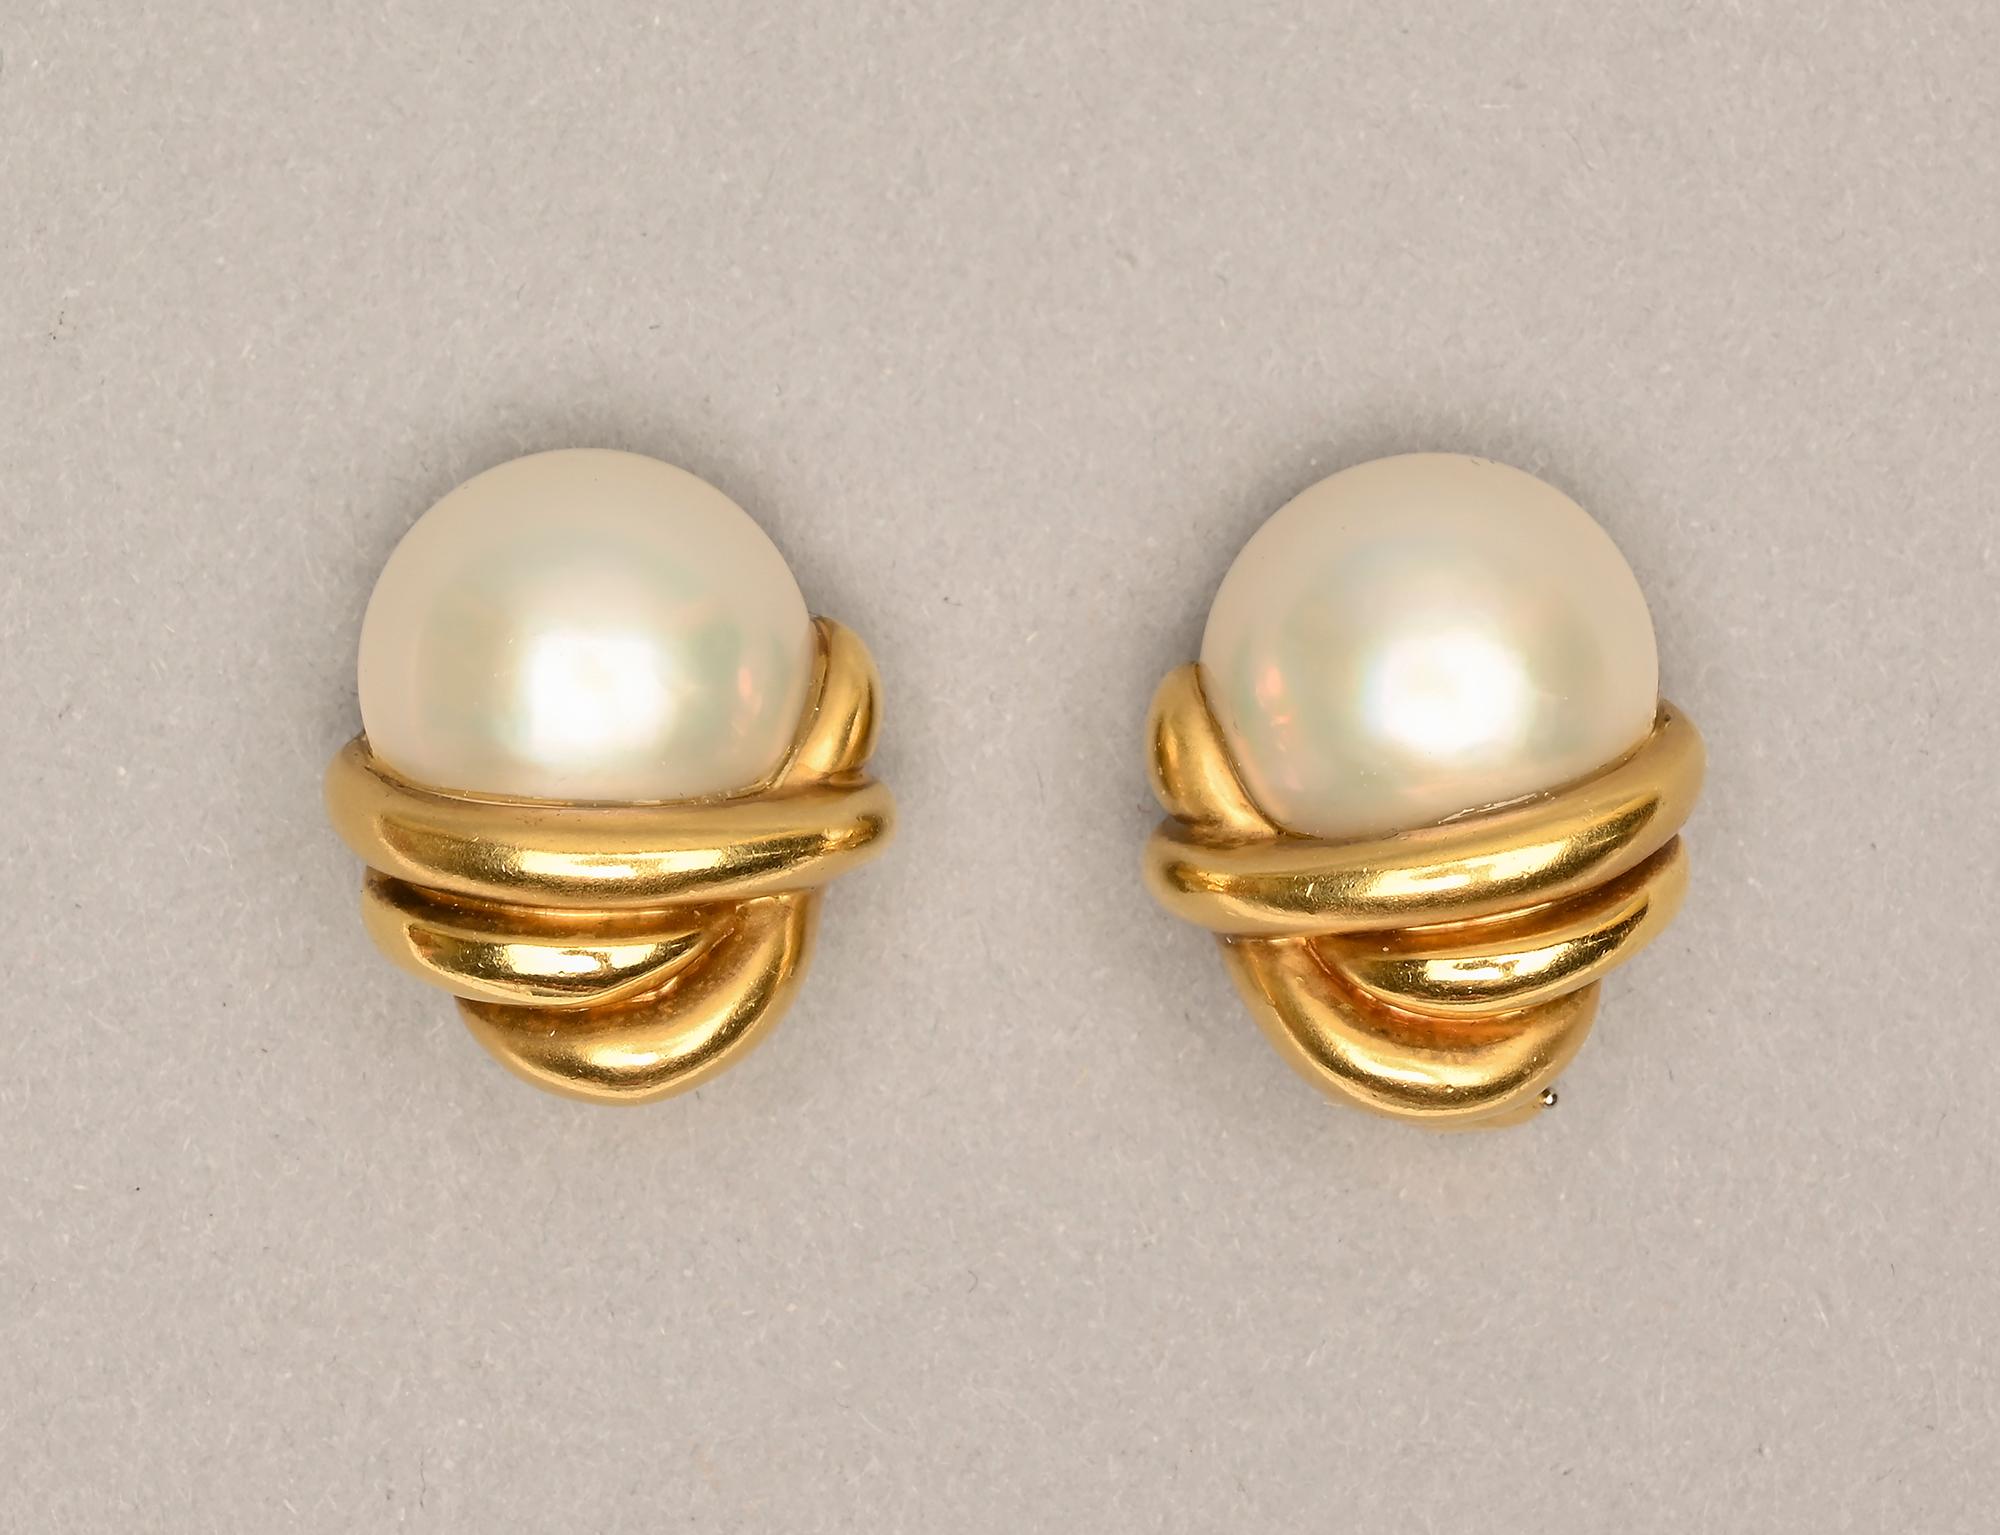 Half pearl earrings by Marlene Stowe with pearls that are 3/4